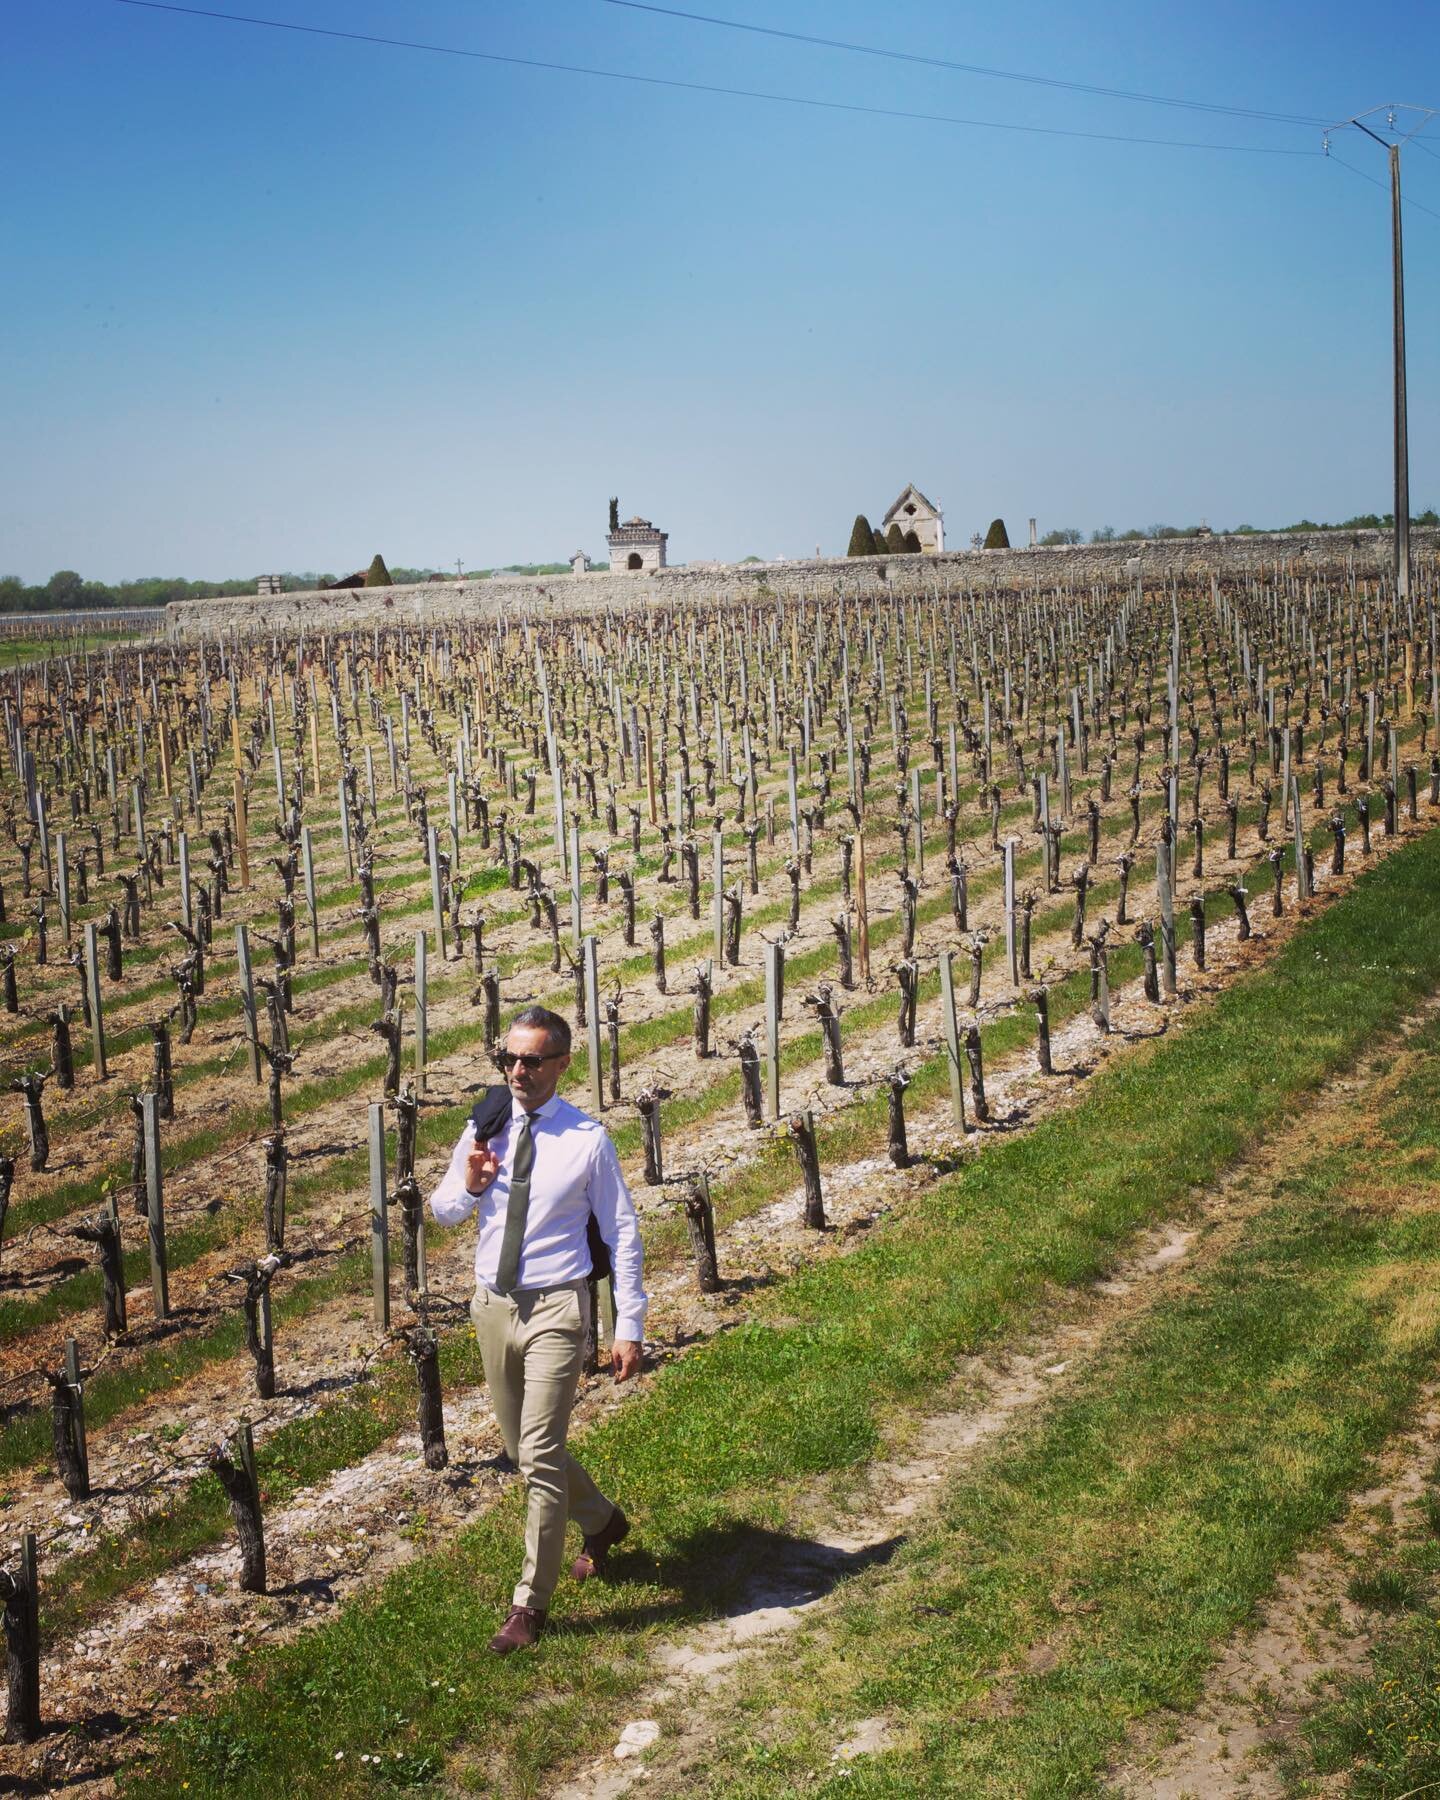 Nothing like wandering around some Bordeaux vineyards.
And we can hear you ask: &ldquo;But where is the baguette?&rdquo; 
Not to worry there are 33,000 boulangeries to choose from in France!